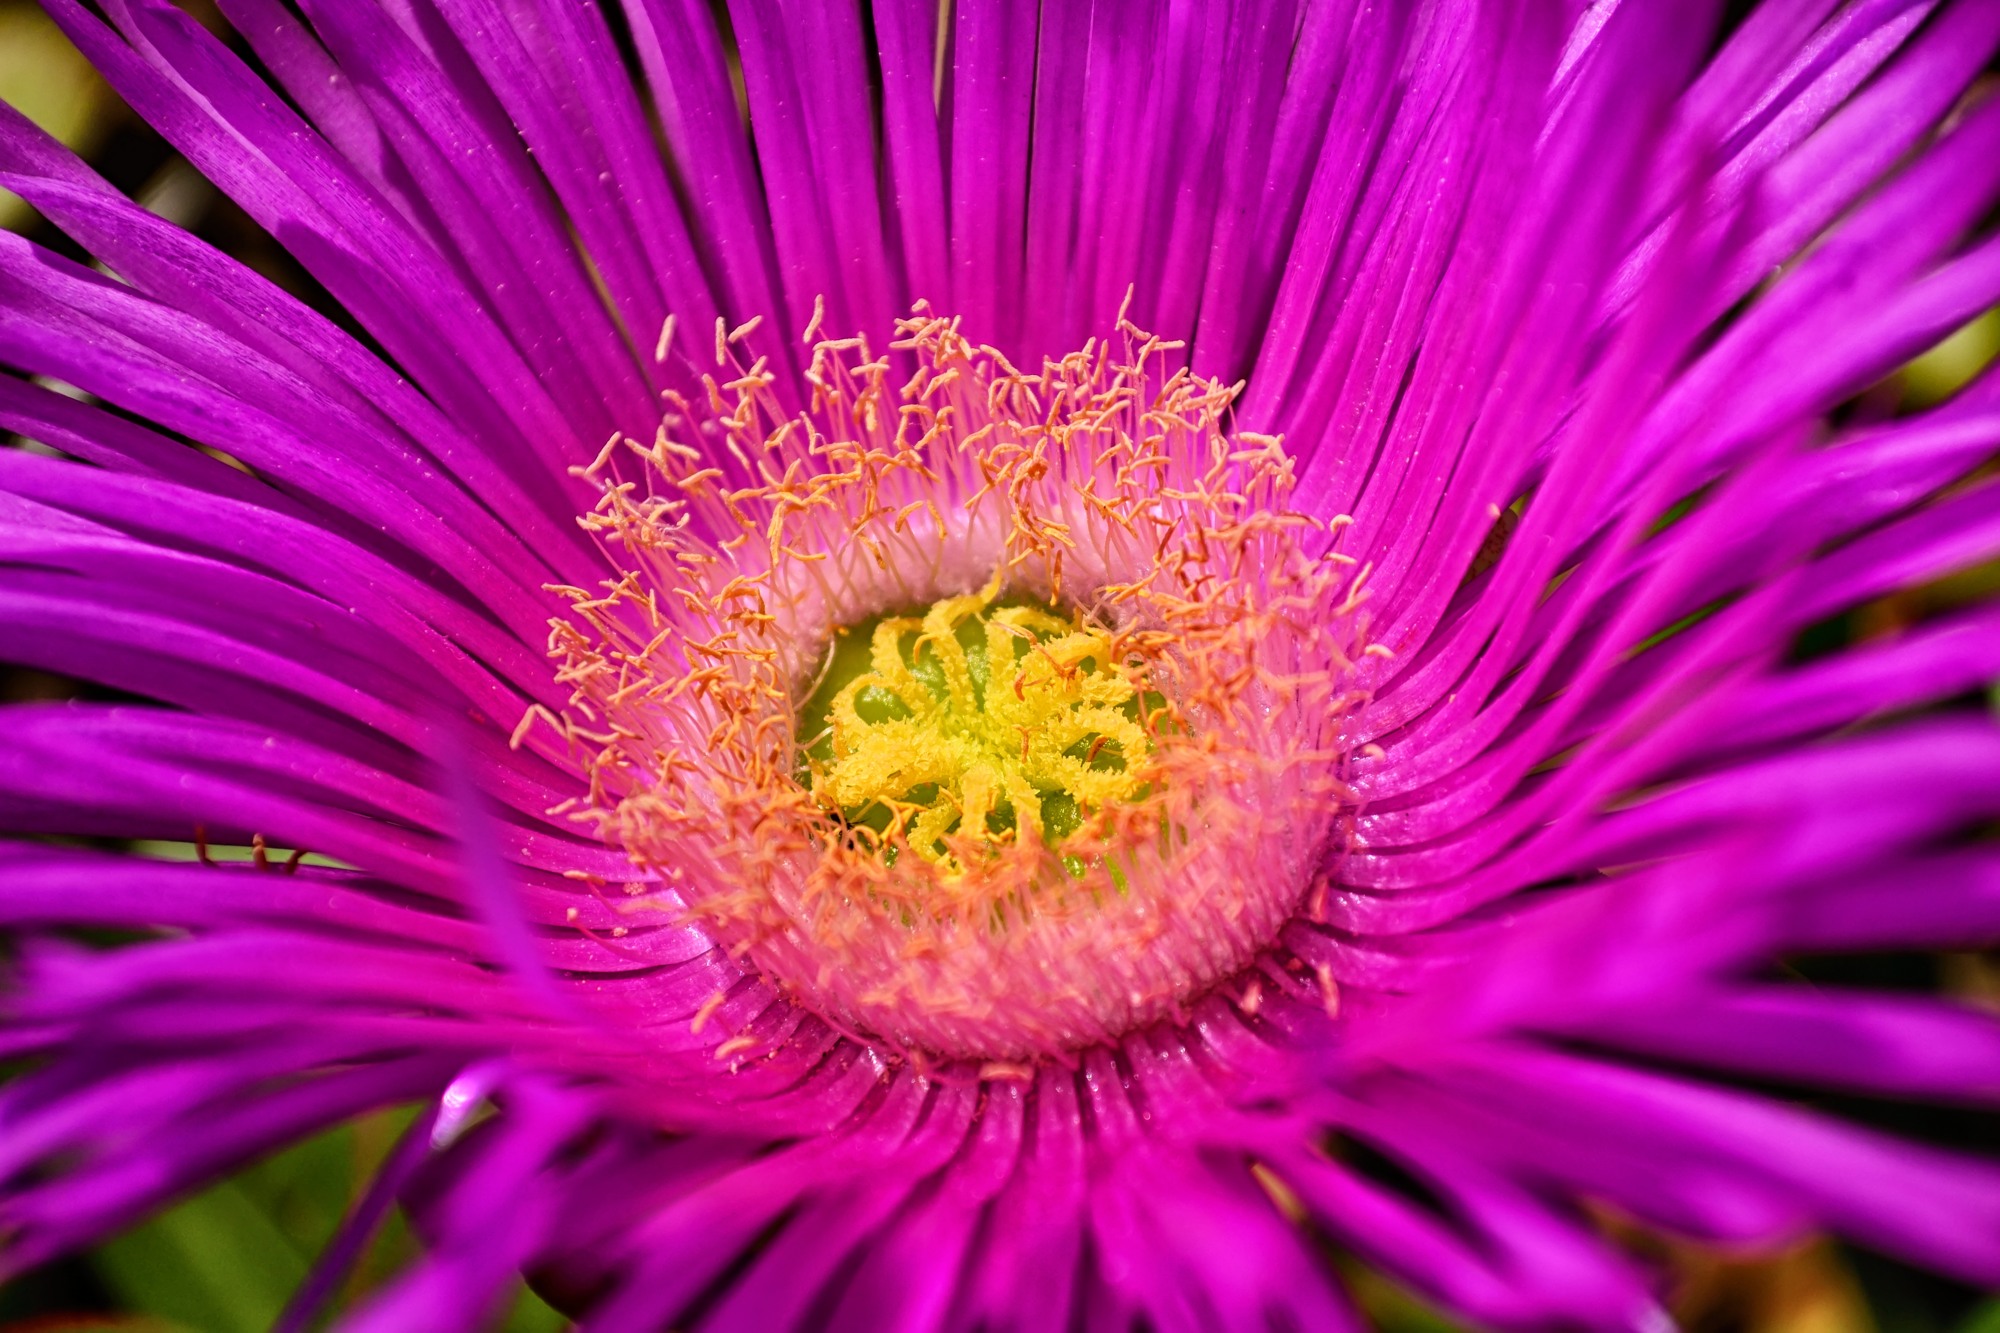 Ice plant in full bloom (close-up)...